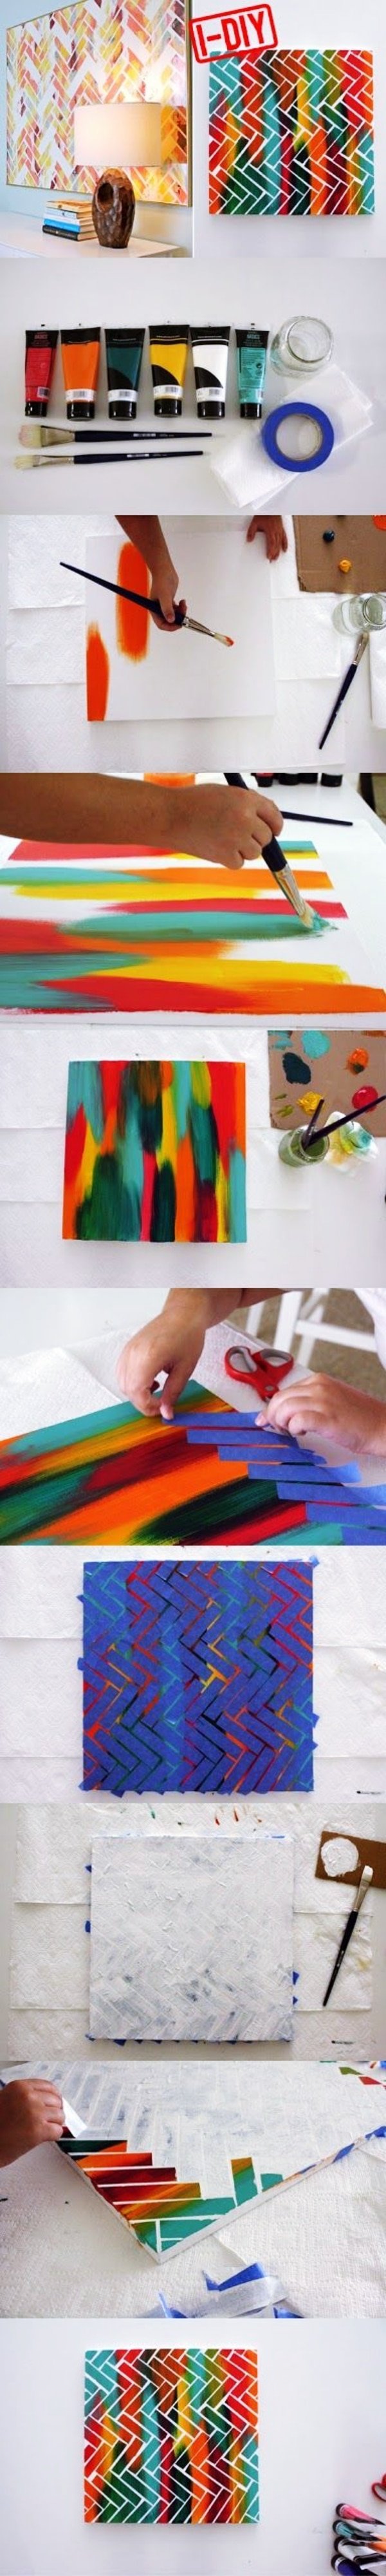 DIY-Canvas-Paintings-Tutorials-Explained-for-Beginners